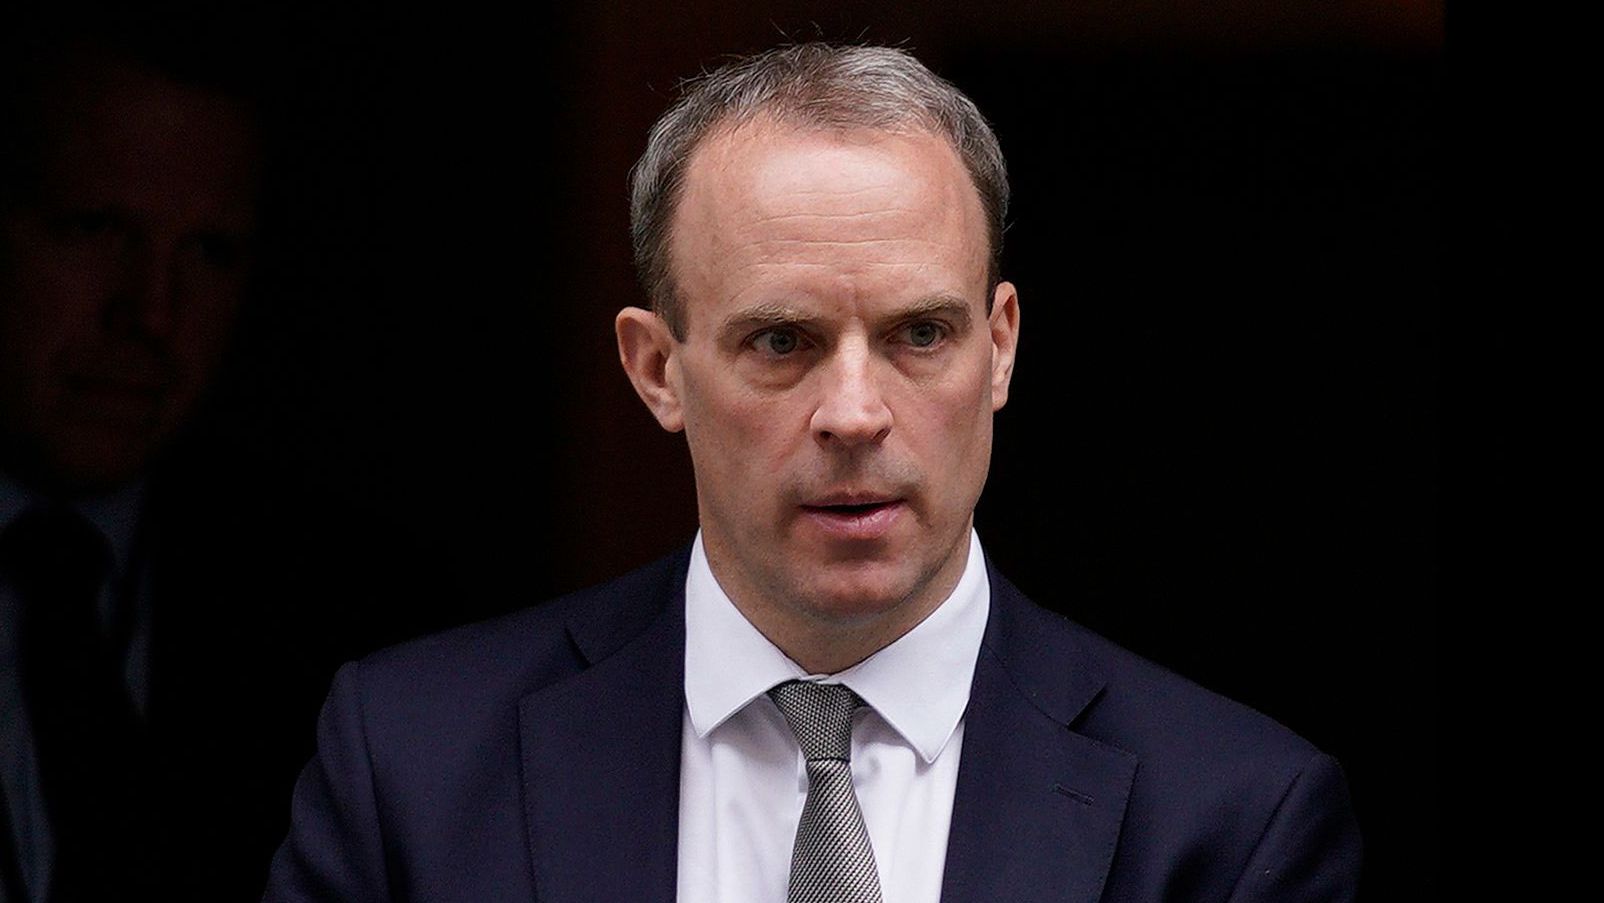 Britain's Foreign Secretary Dominic Raab said Russia almost certainly tried to interfere in last year's UK election.